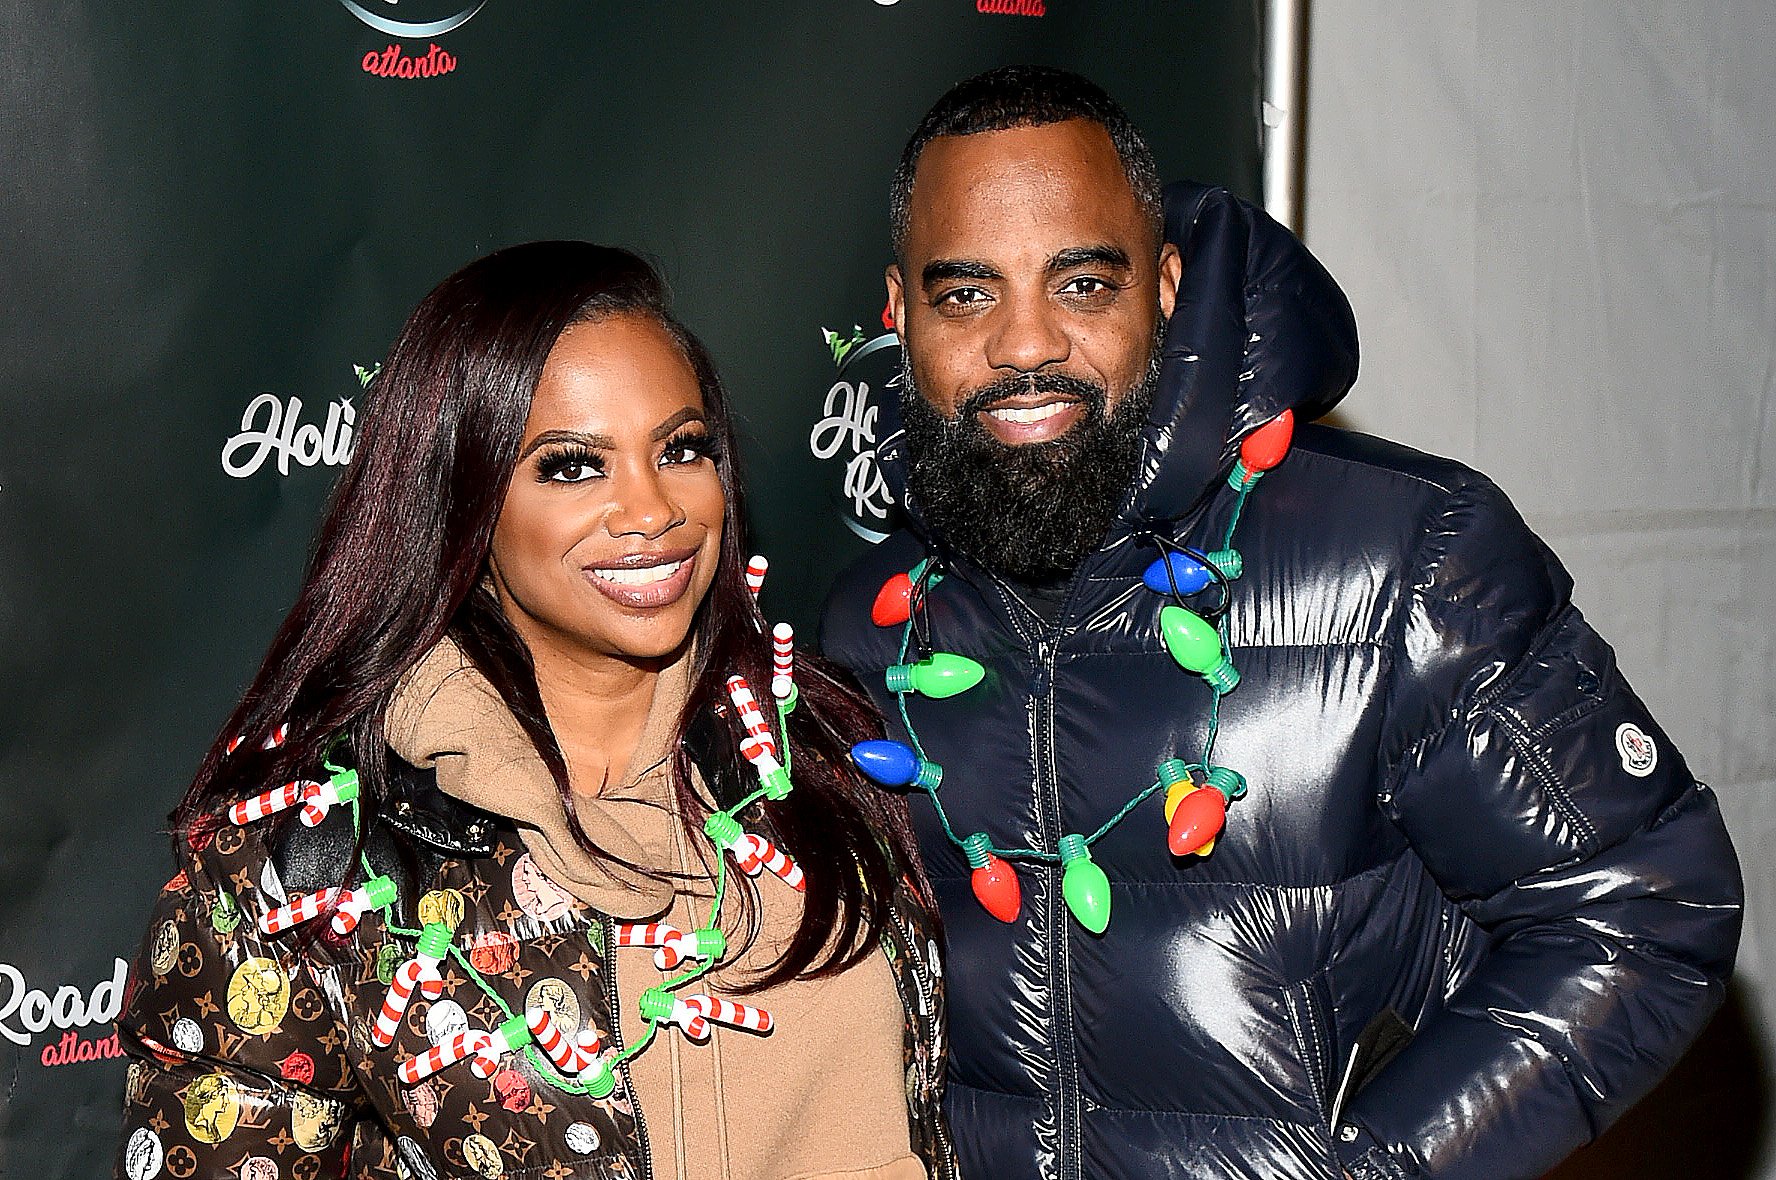 Kandi Burruss and Todd Tucker at the "Holiday Road Atlanta Friends & Family" preview in 2021 in Fairburn, Georgia. | Source: Getty Images